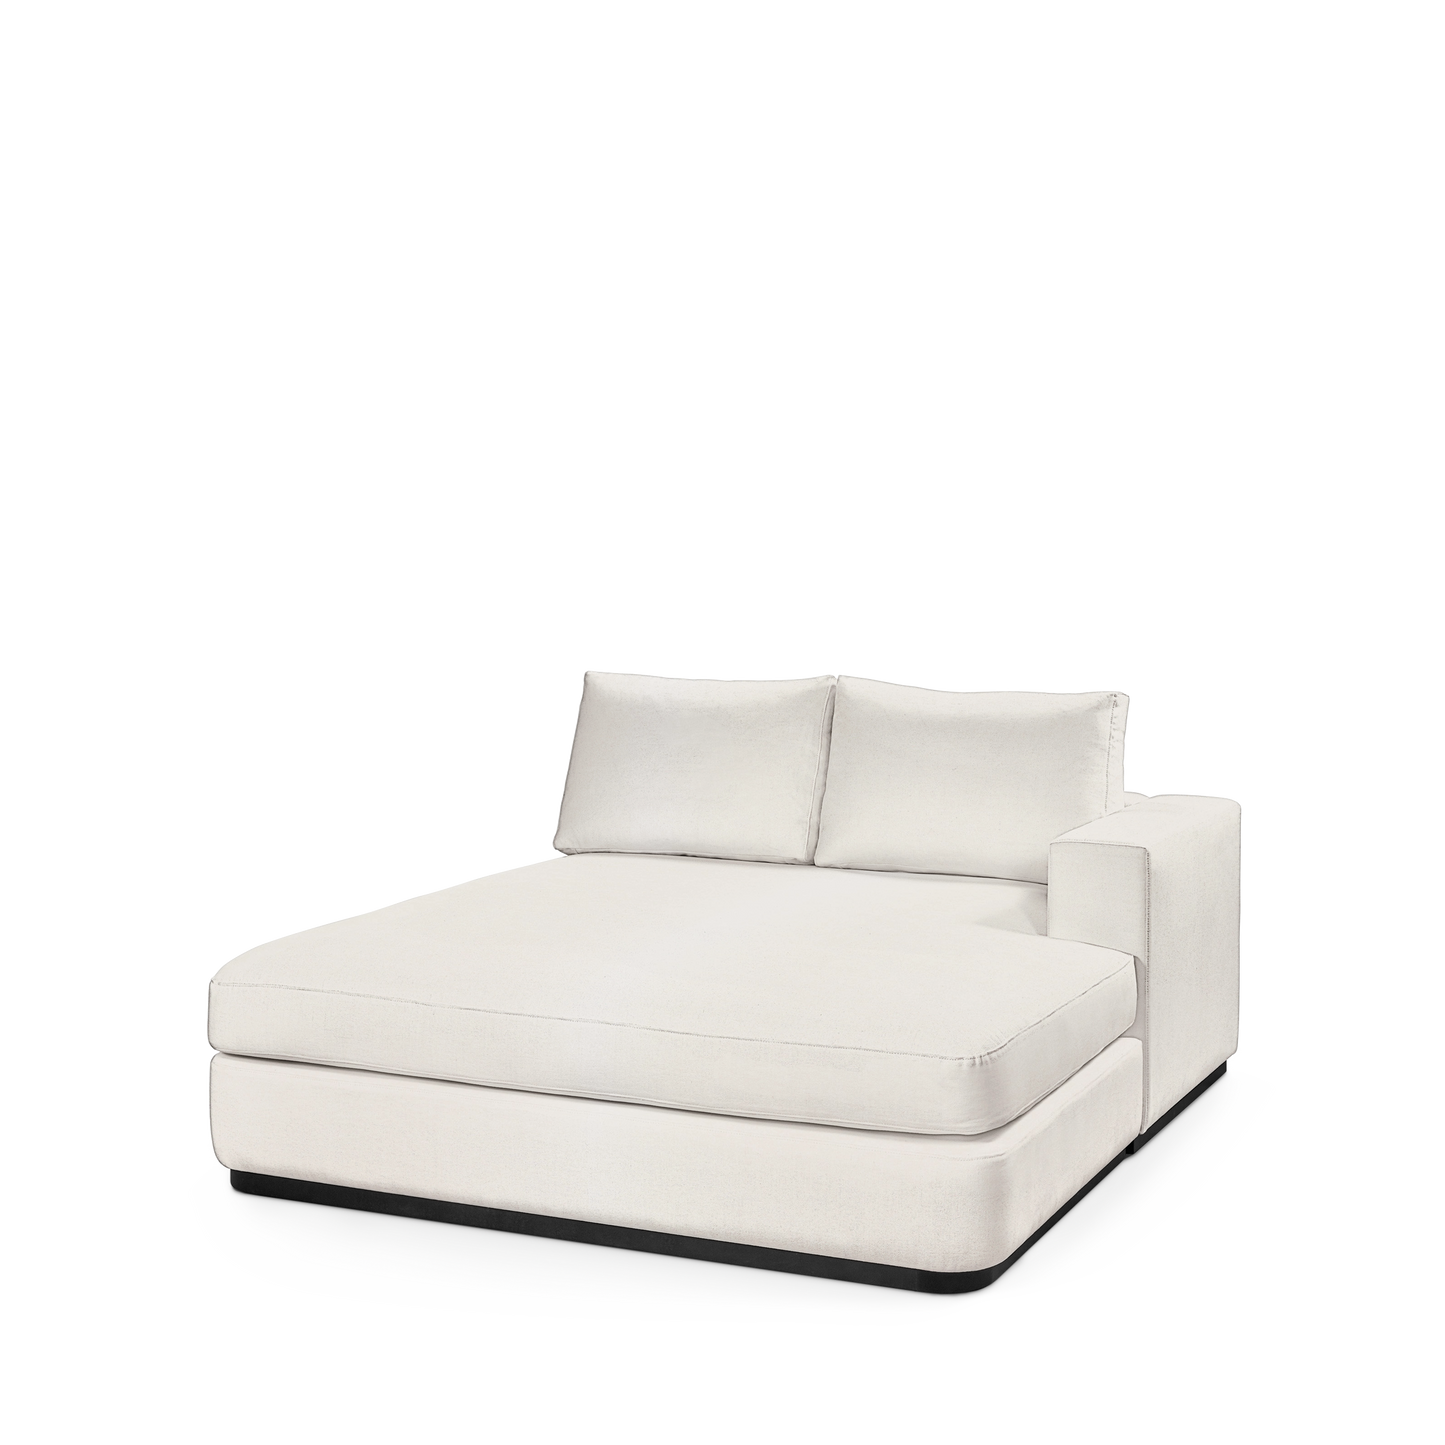 ATLAS 160 Lounge Bed arm rest right with bolt white textile